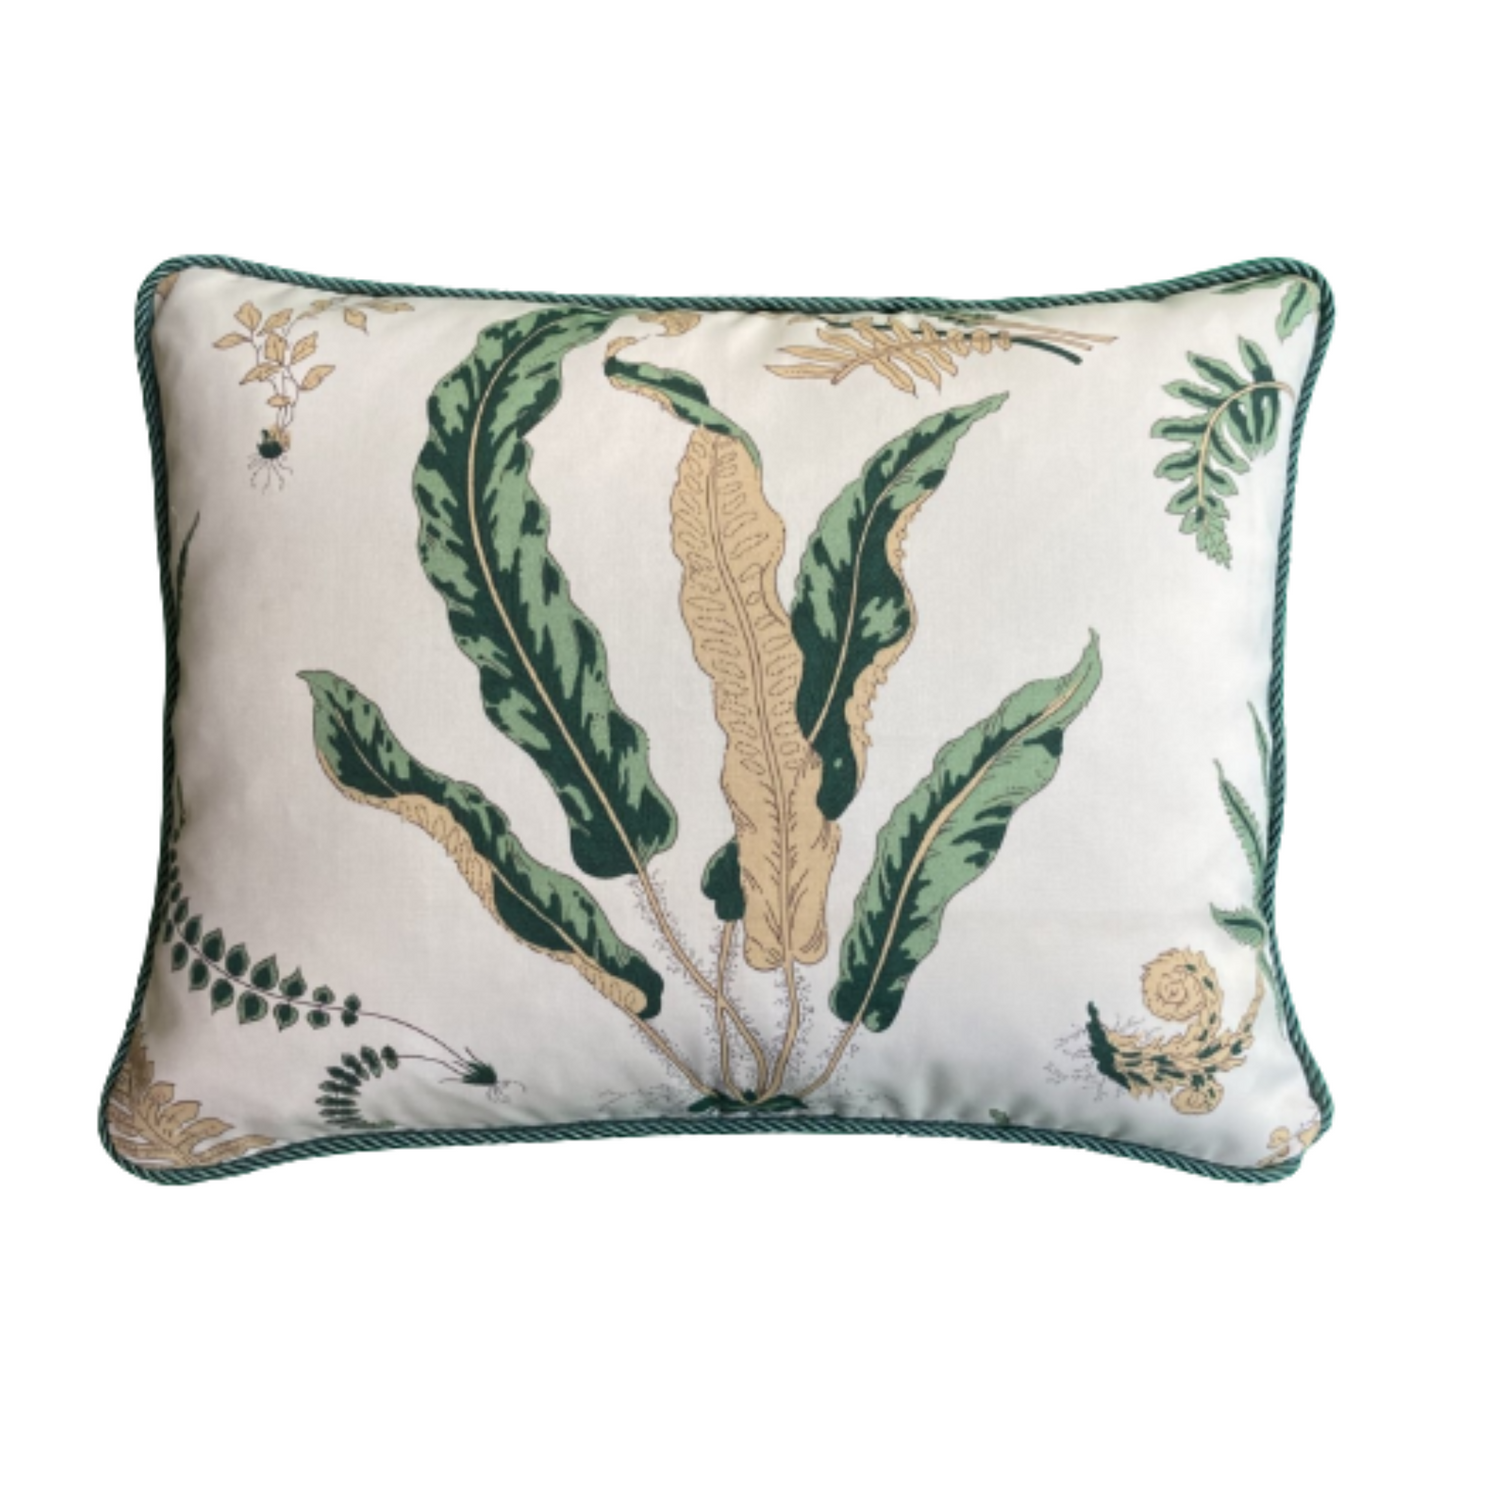 Miss De Wolf in the Conservatory Iconic Scalamandre 18 X 22 Designer Pillow with Down Feather Insert